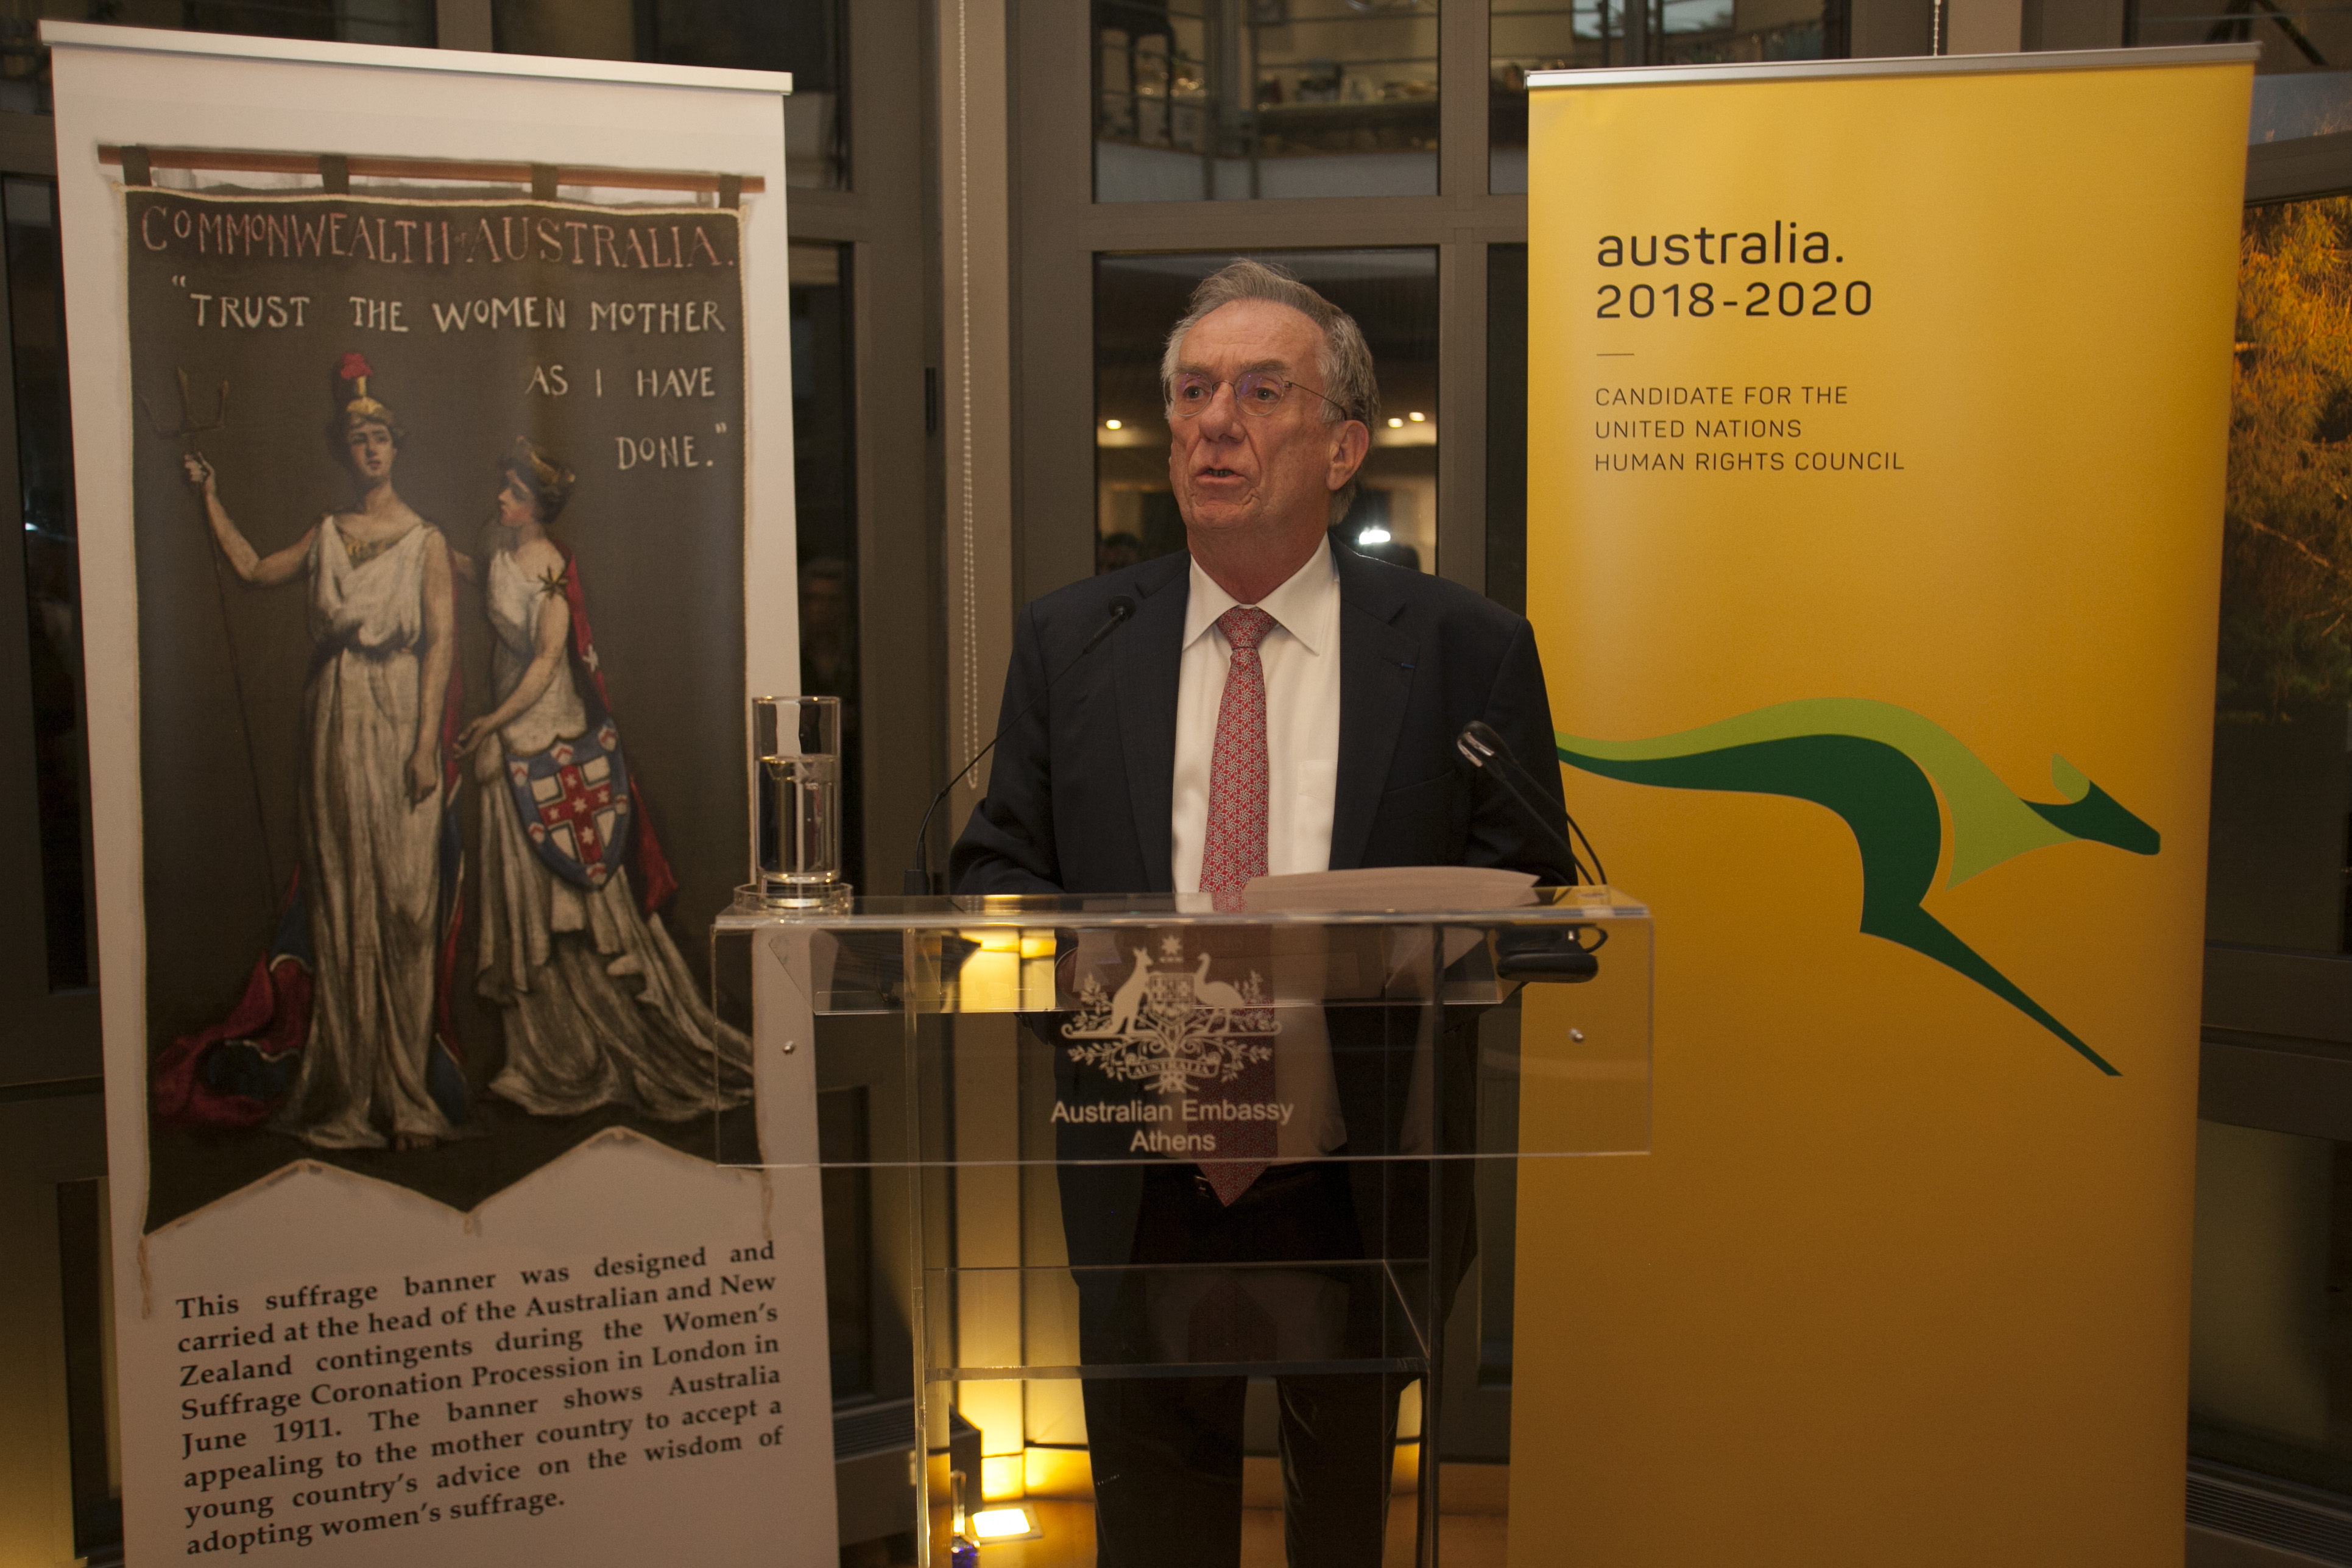 The ambassador of Australia, Mr John Griffin during his speech at the event.